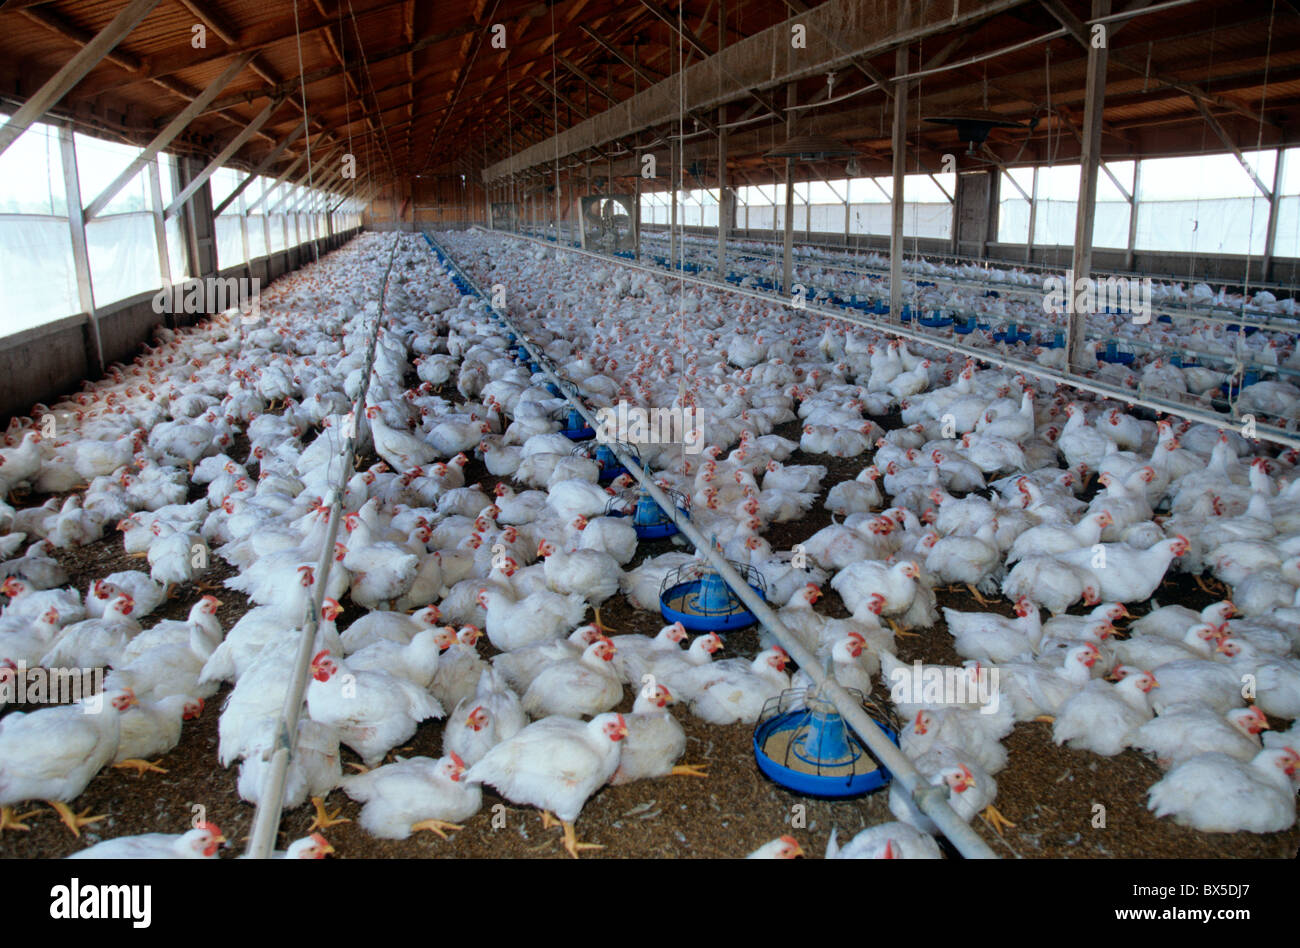 Poultry Chicken Ranch, 'fryers', roaming sheltered structure Stock Photo